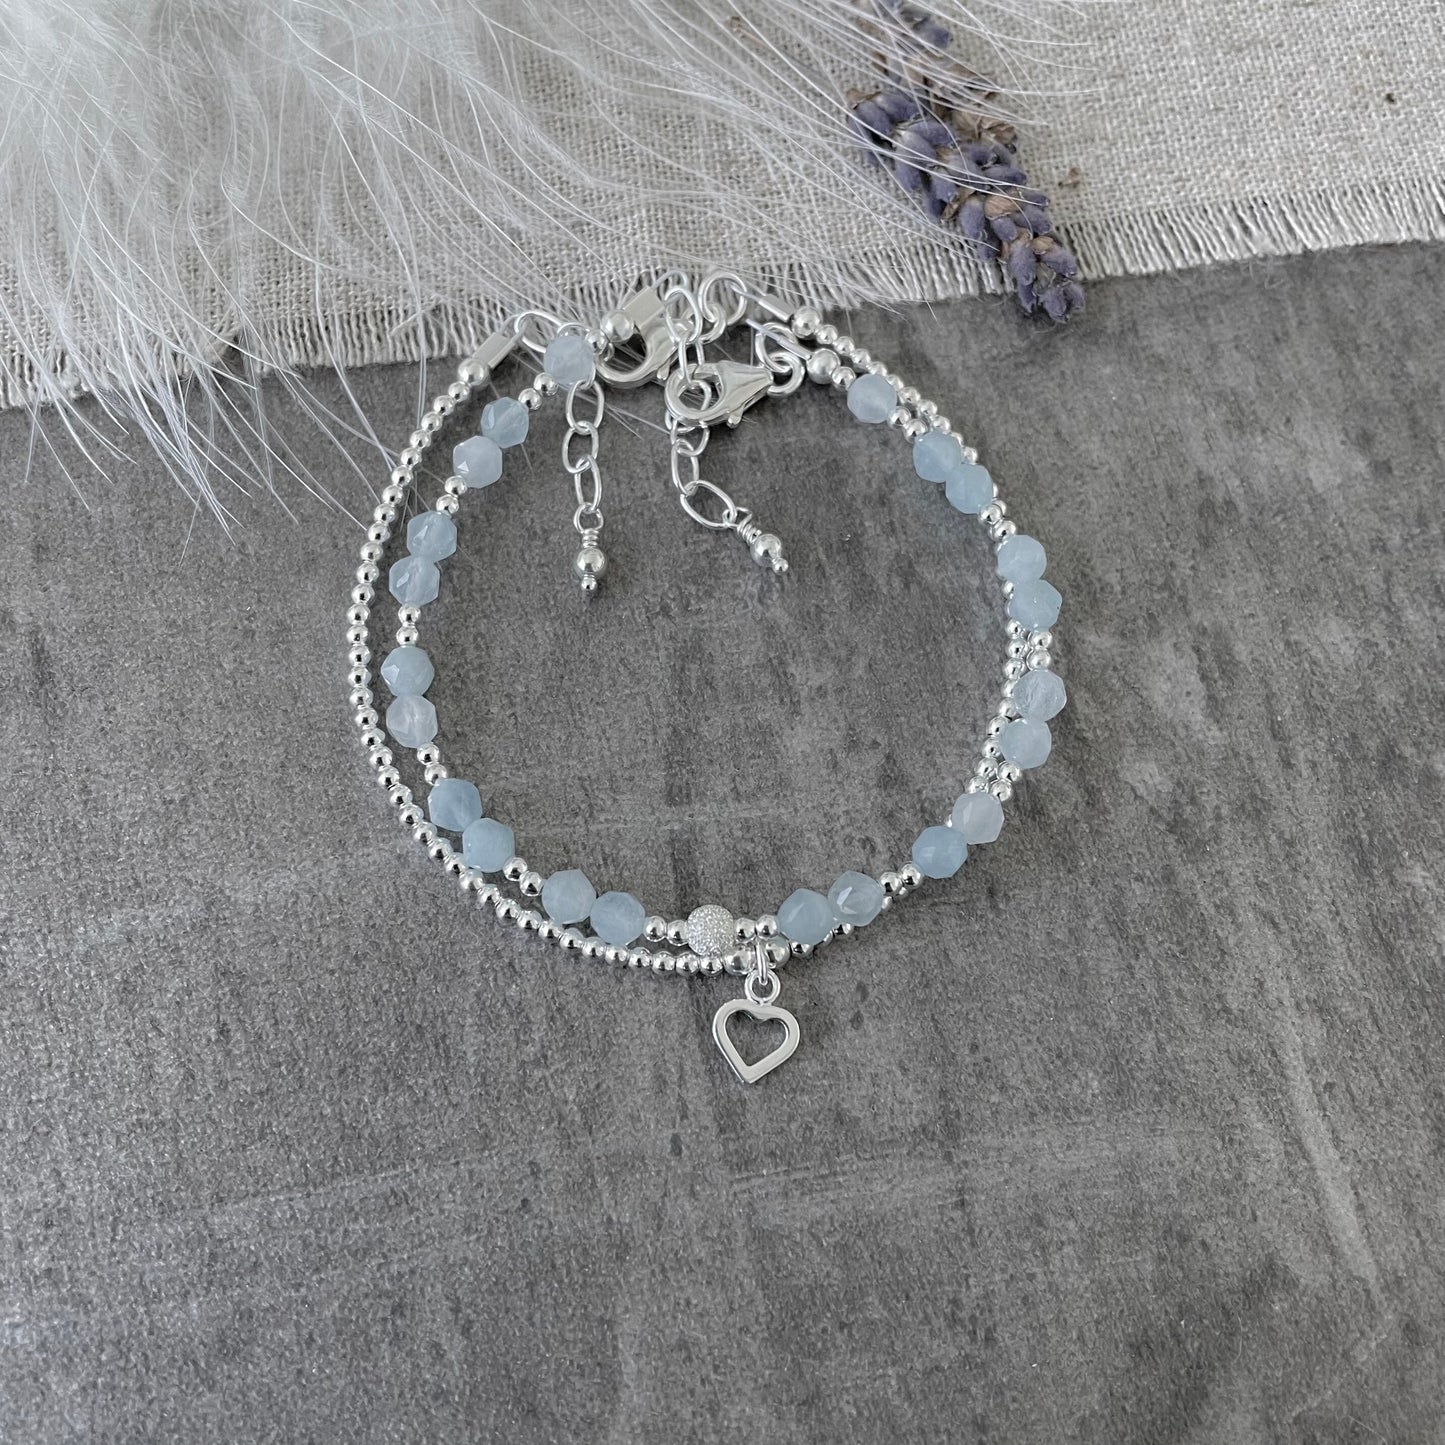 Aquamarine Bracelet Set made with March Birthstone and Sterling Silver, March Birthday Gift for Women